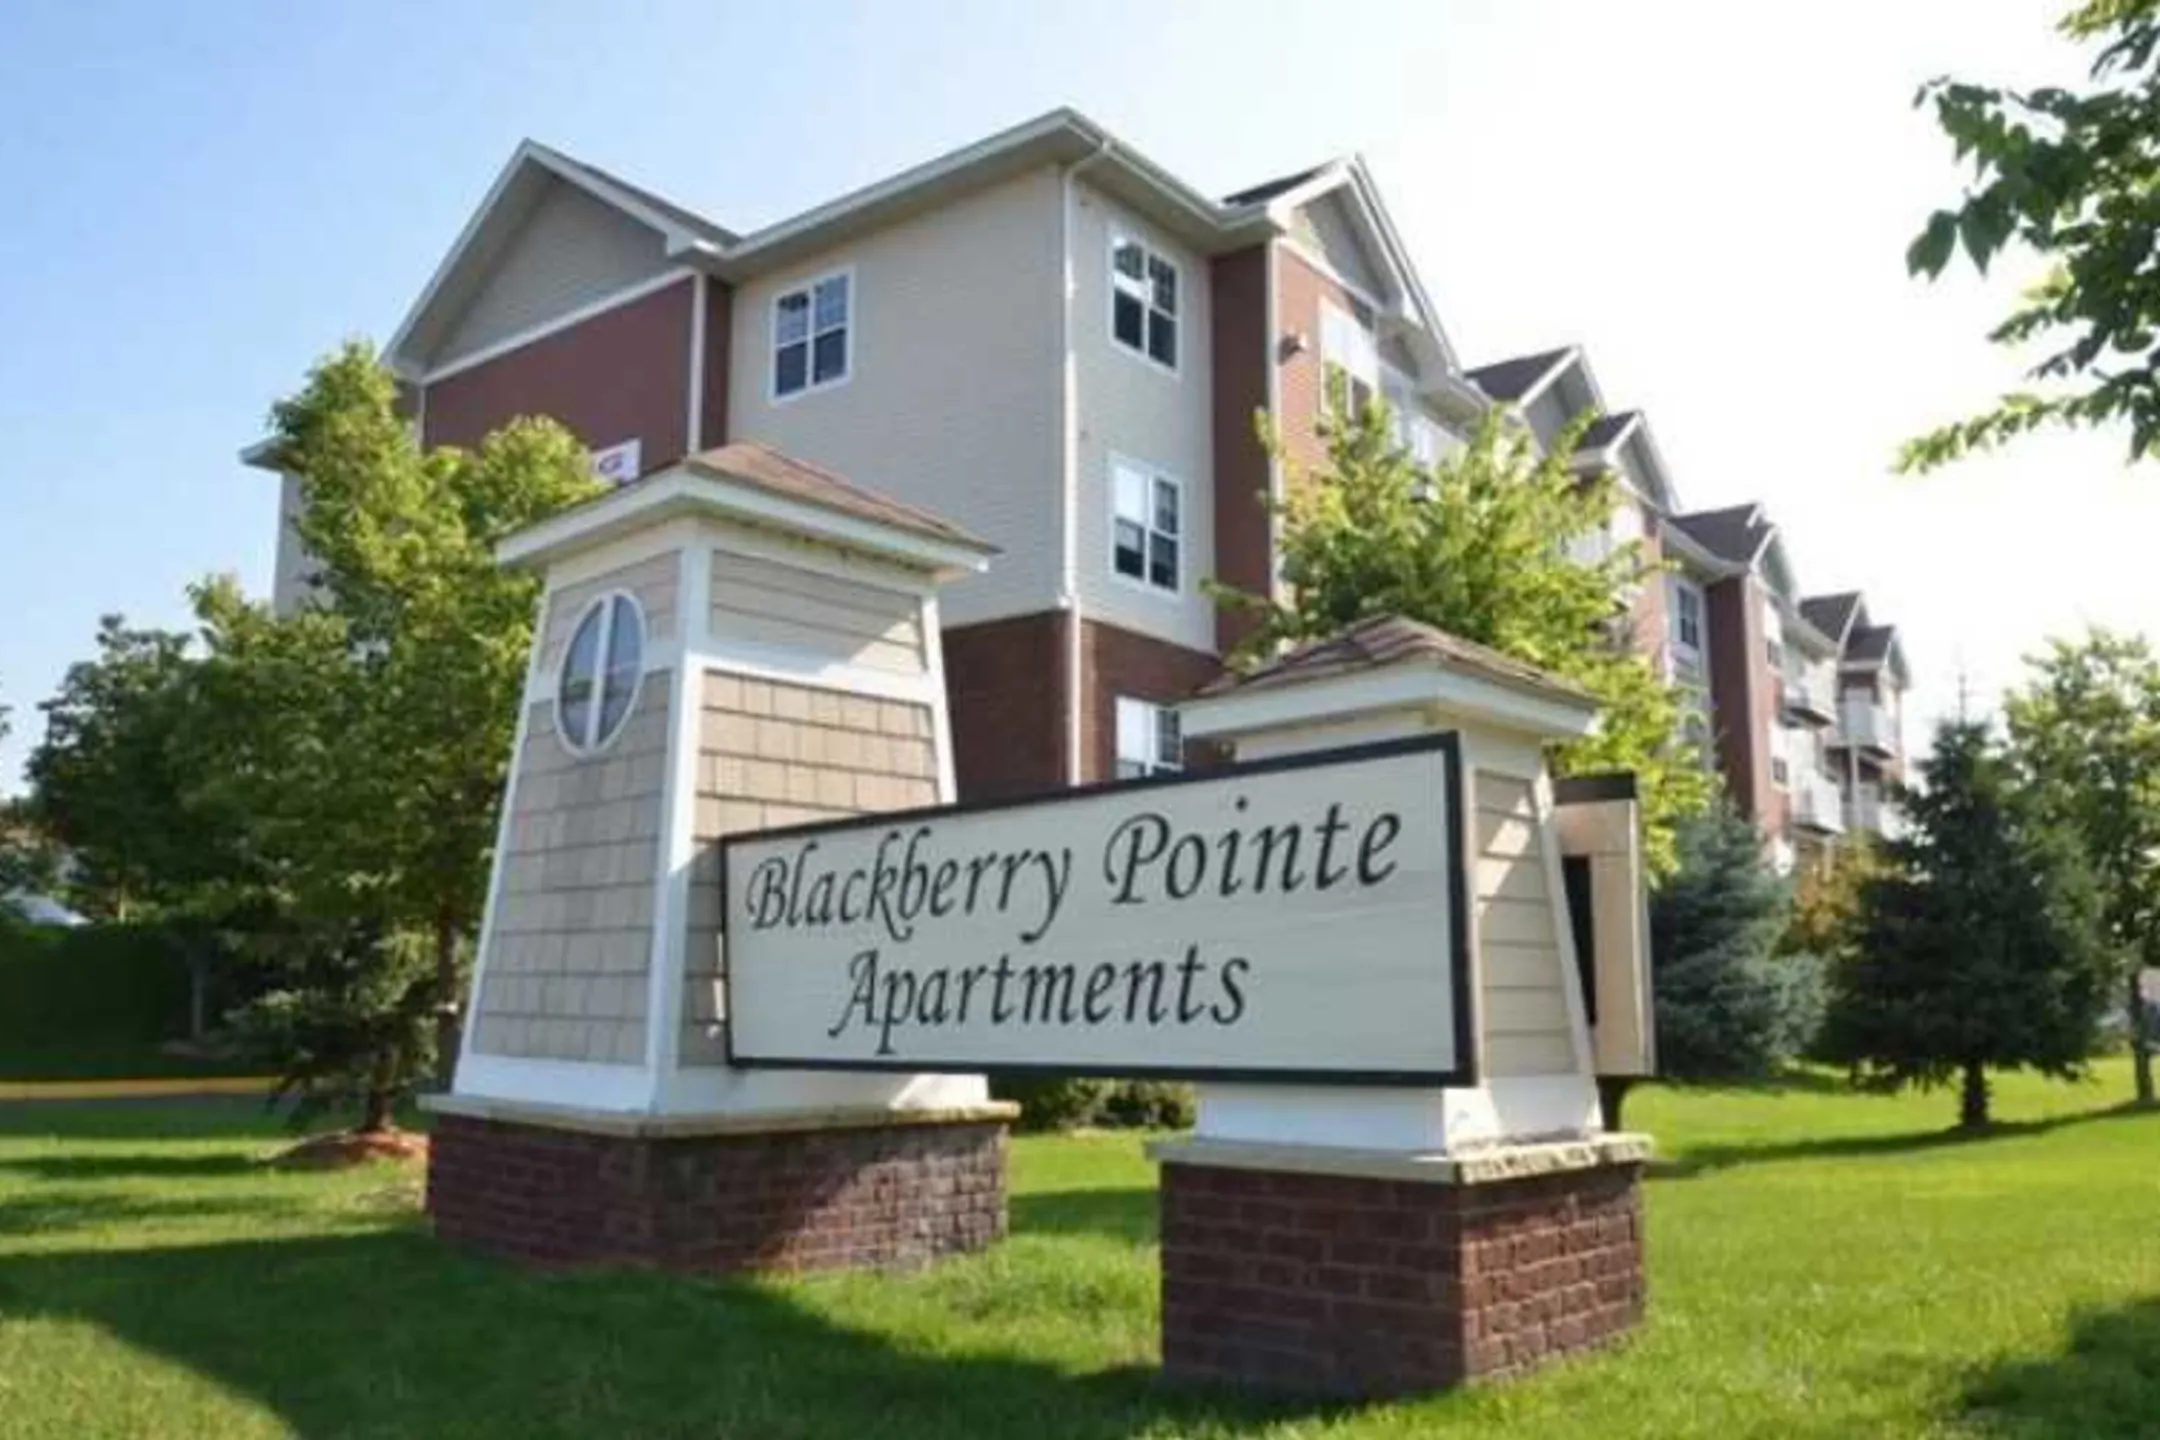 Building - Blackberry Pointe Apartments - Inver Grove Heights, MN